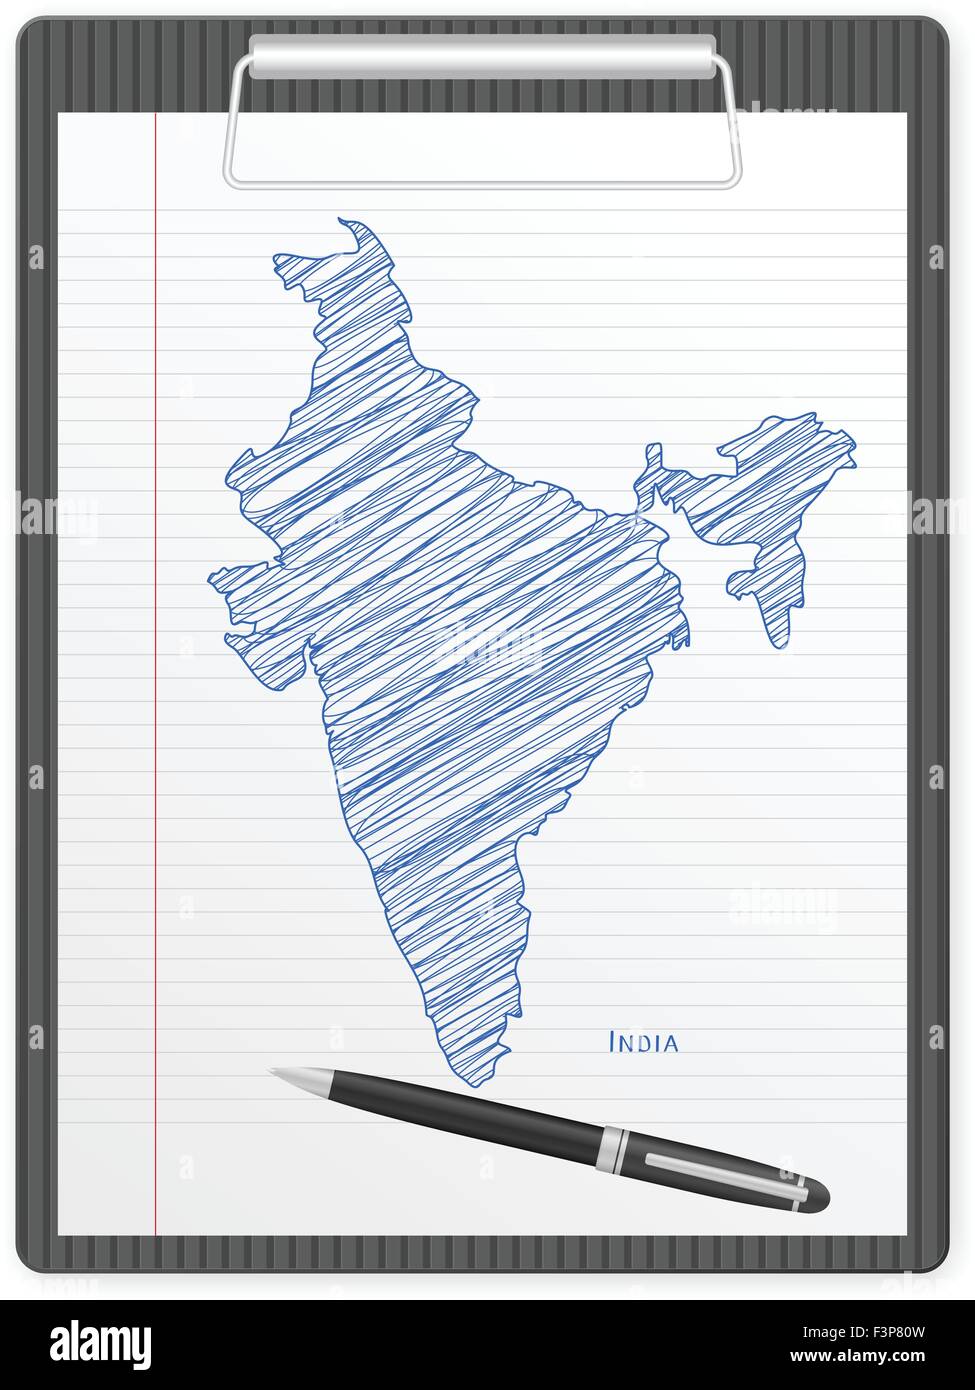 Map of India[outline]Authentic. The Indian Map [Not to scale] in outline.  It is #Sponsored , #SPONSORED, #AD, #India, #scale, #Indian, #Map